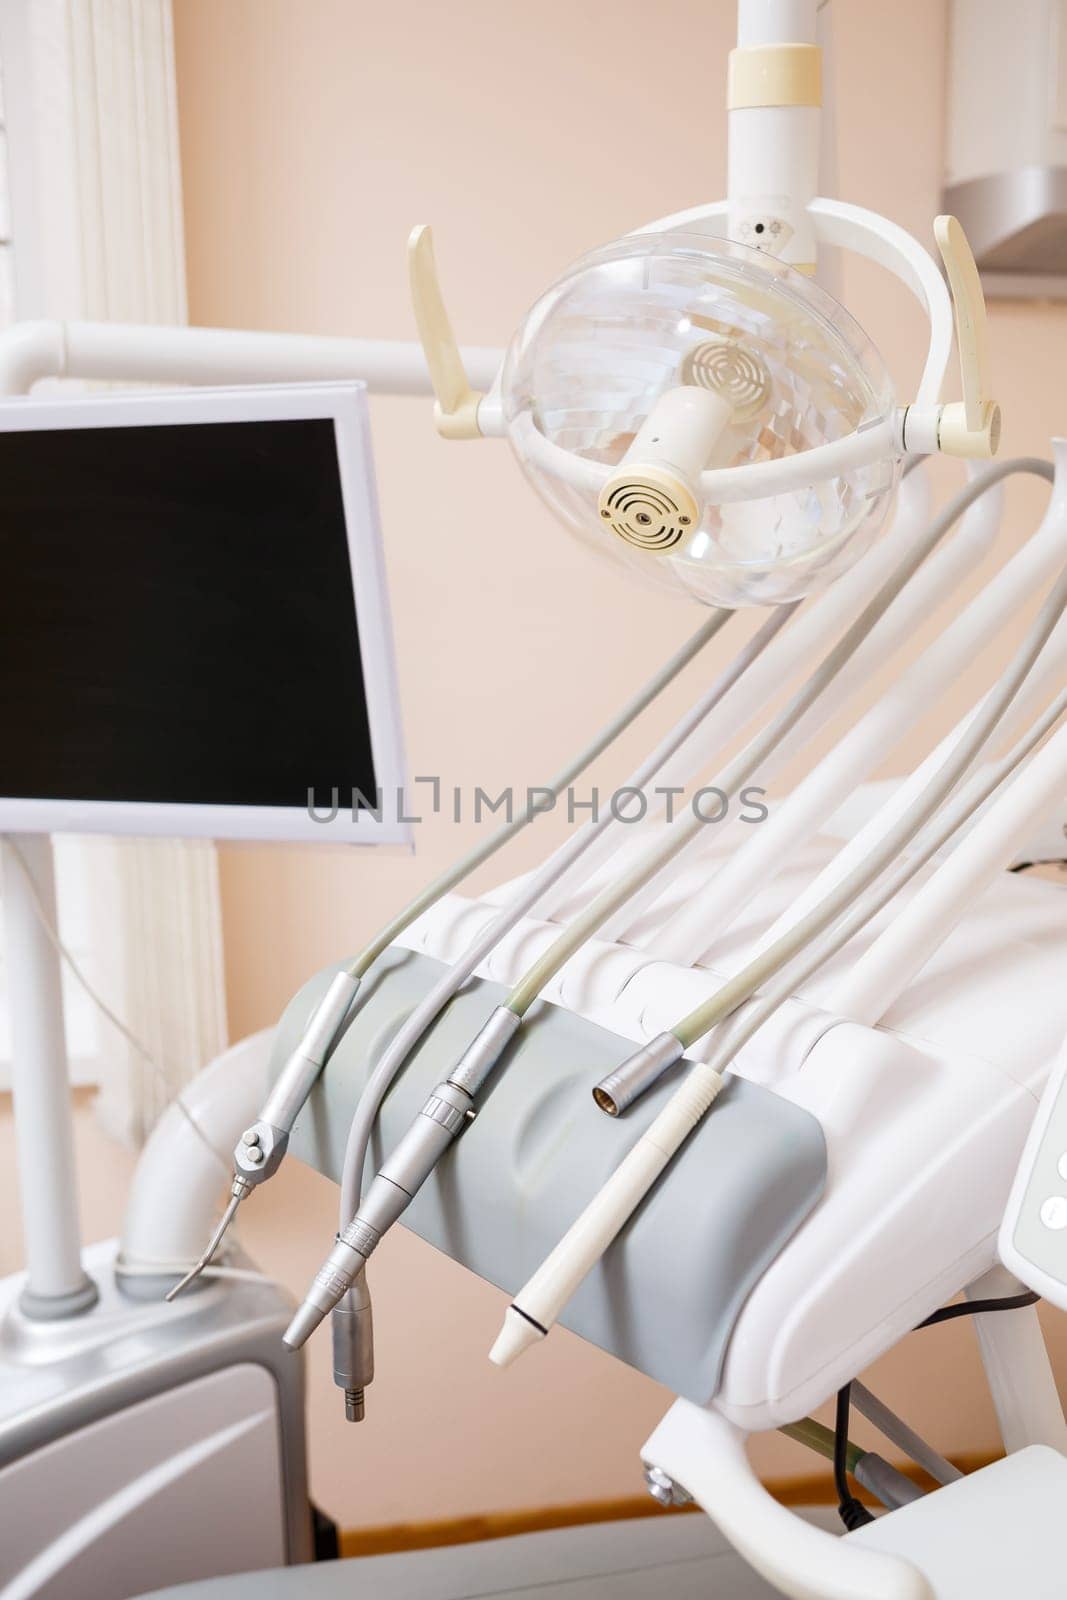 Dental treatment device for patients. The workplace of a professional dentist. Healthy teeth. Dental office with nobody in